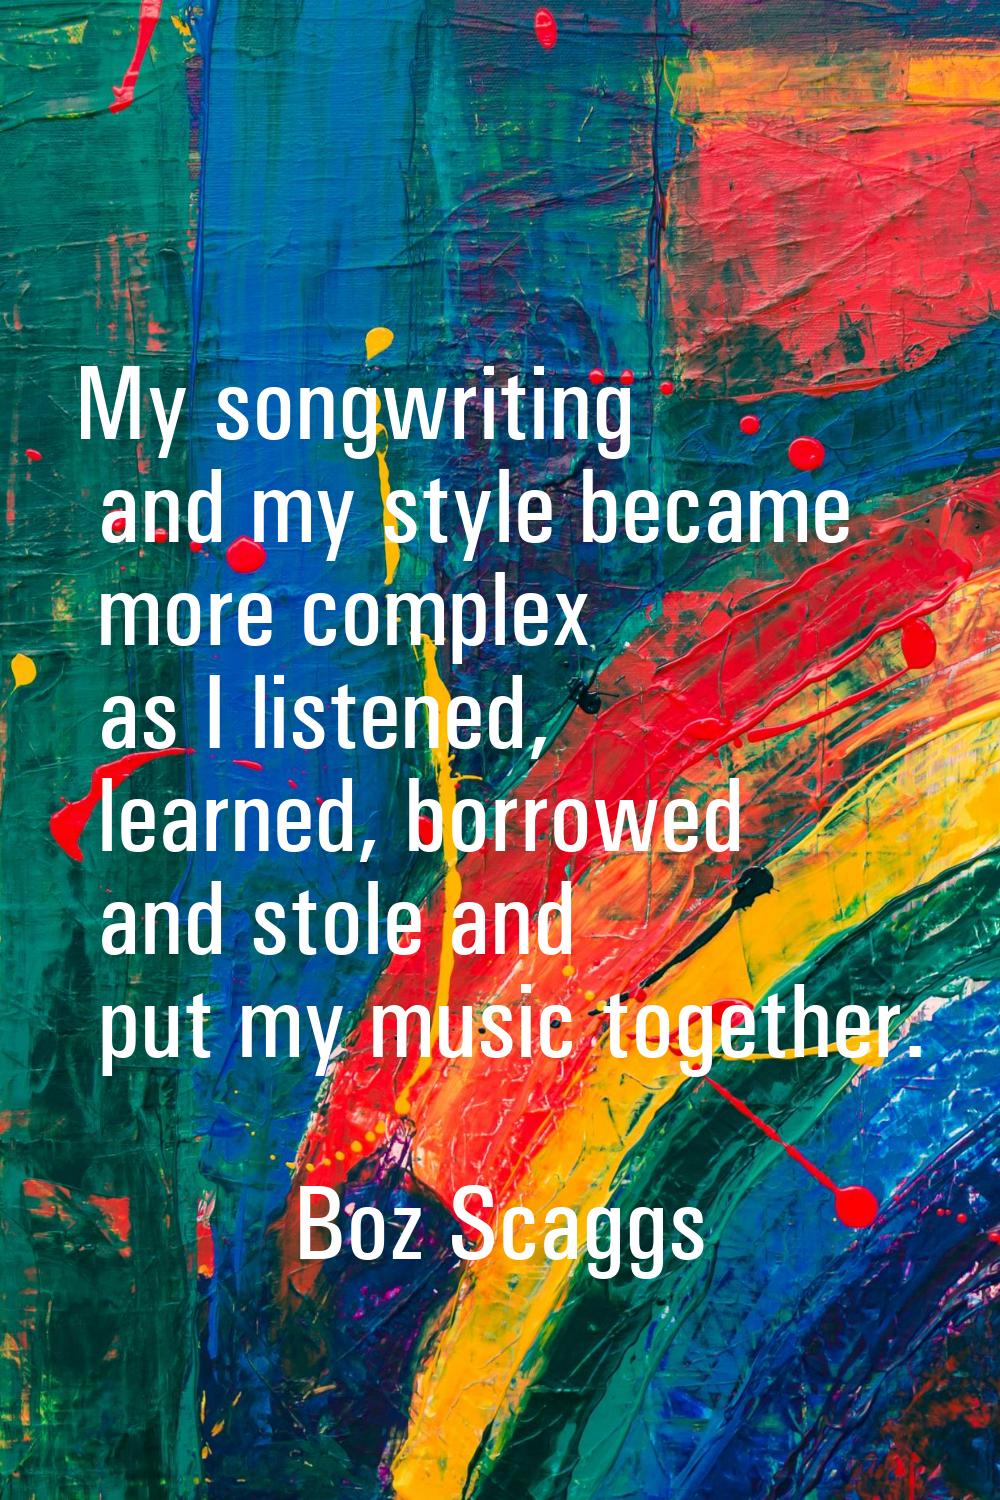 My songwriting and my style became more complex as I listened, learned, borrowed and stole and put 